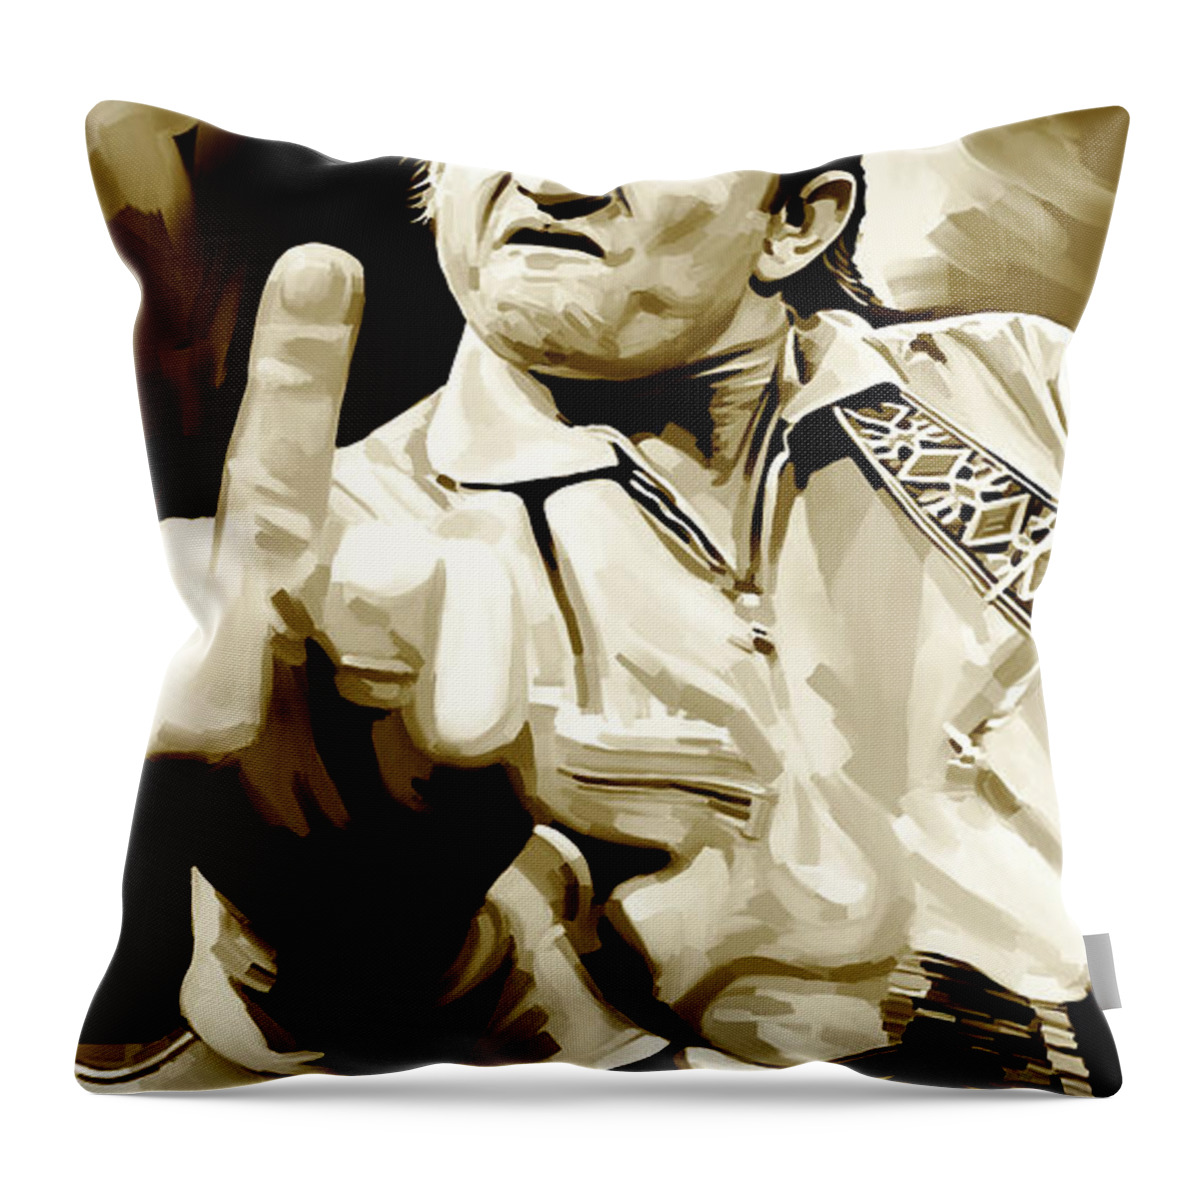 Johnny Cash Paintings Throw Pillow featuring the painting Johnny Cash Artwork 2 by Sheraz A